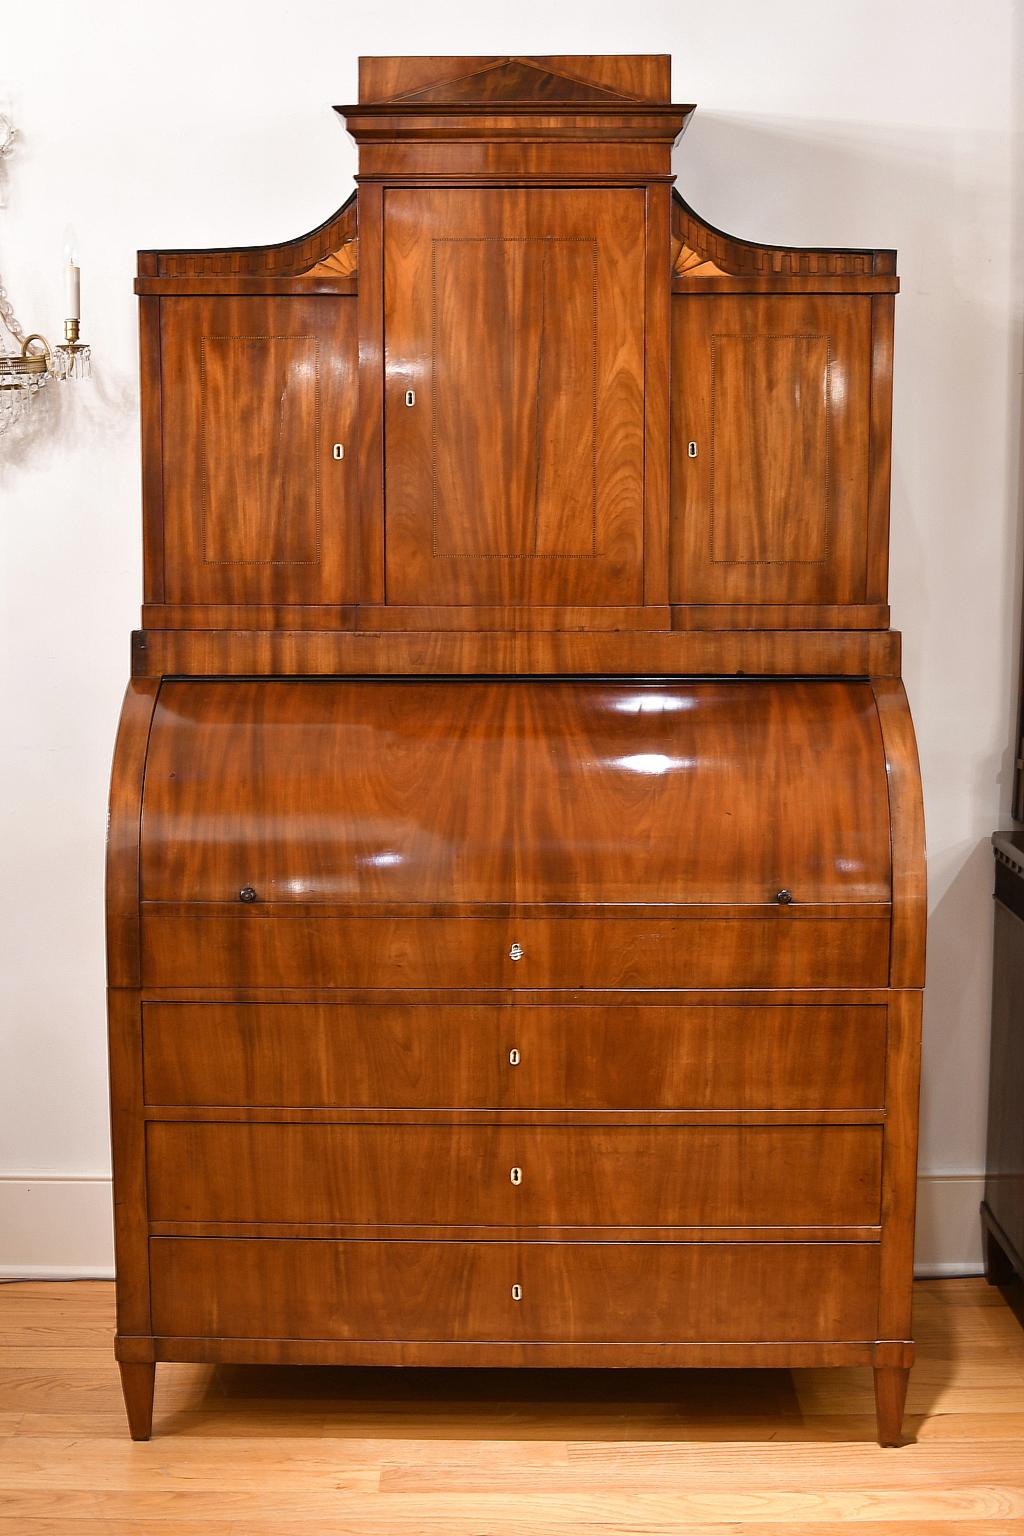 An exquisite Empire bureau secretary with bookcase, in fine West Indies/ Cuban mahogany. Denmark, circa 1800. Cylinder top opens to a pull-out desk which offers an adjustable lectern or writing surface that is flanked by sliding storage